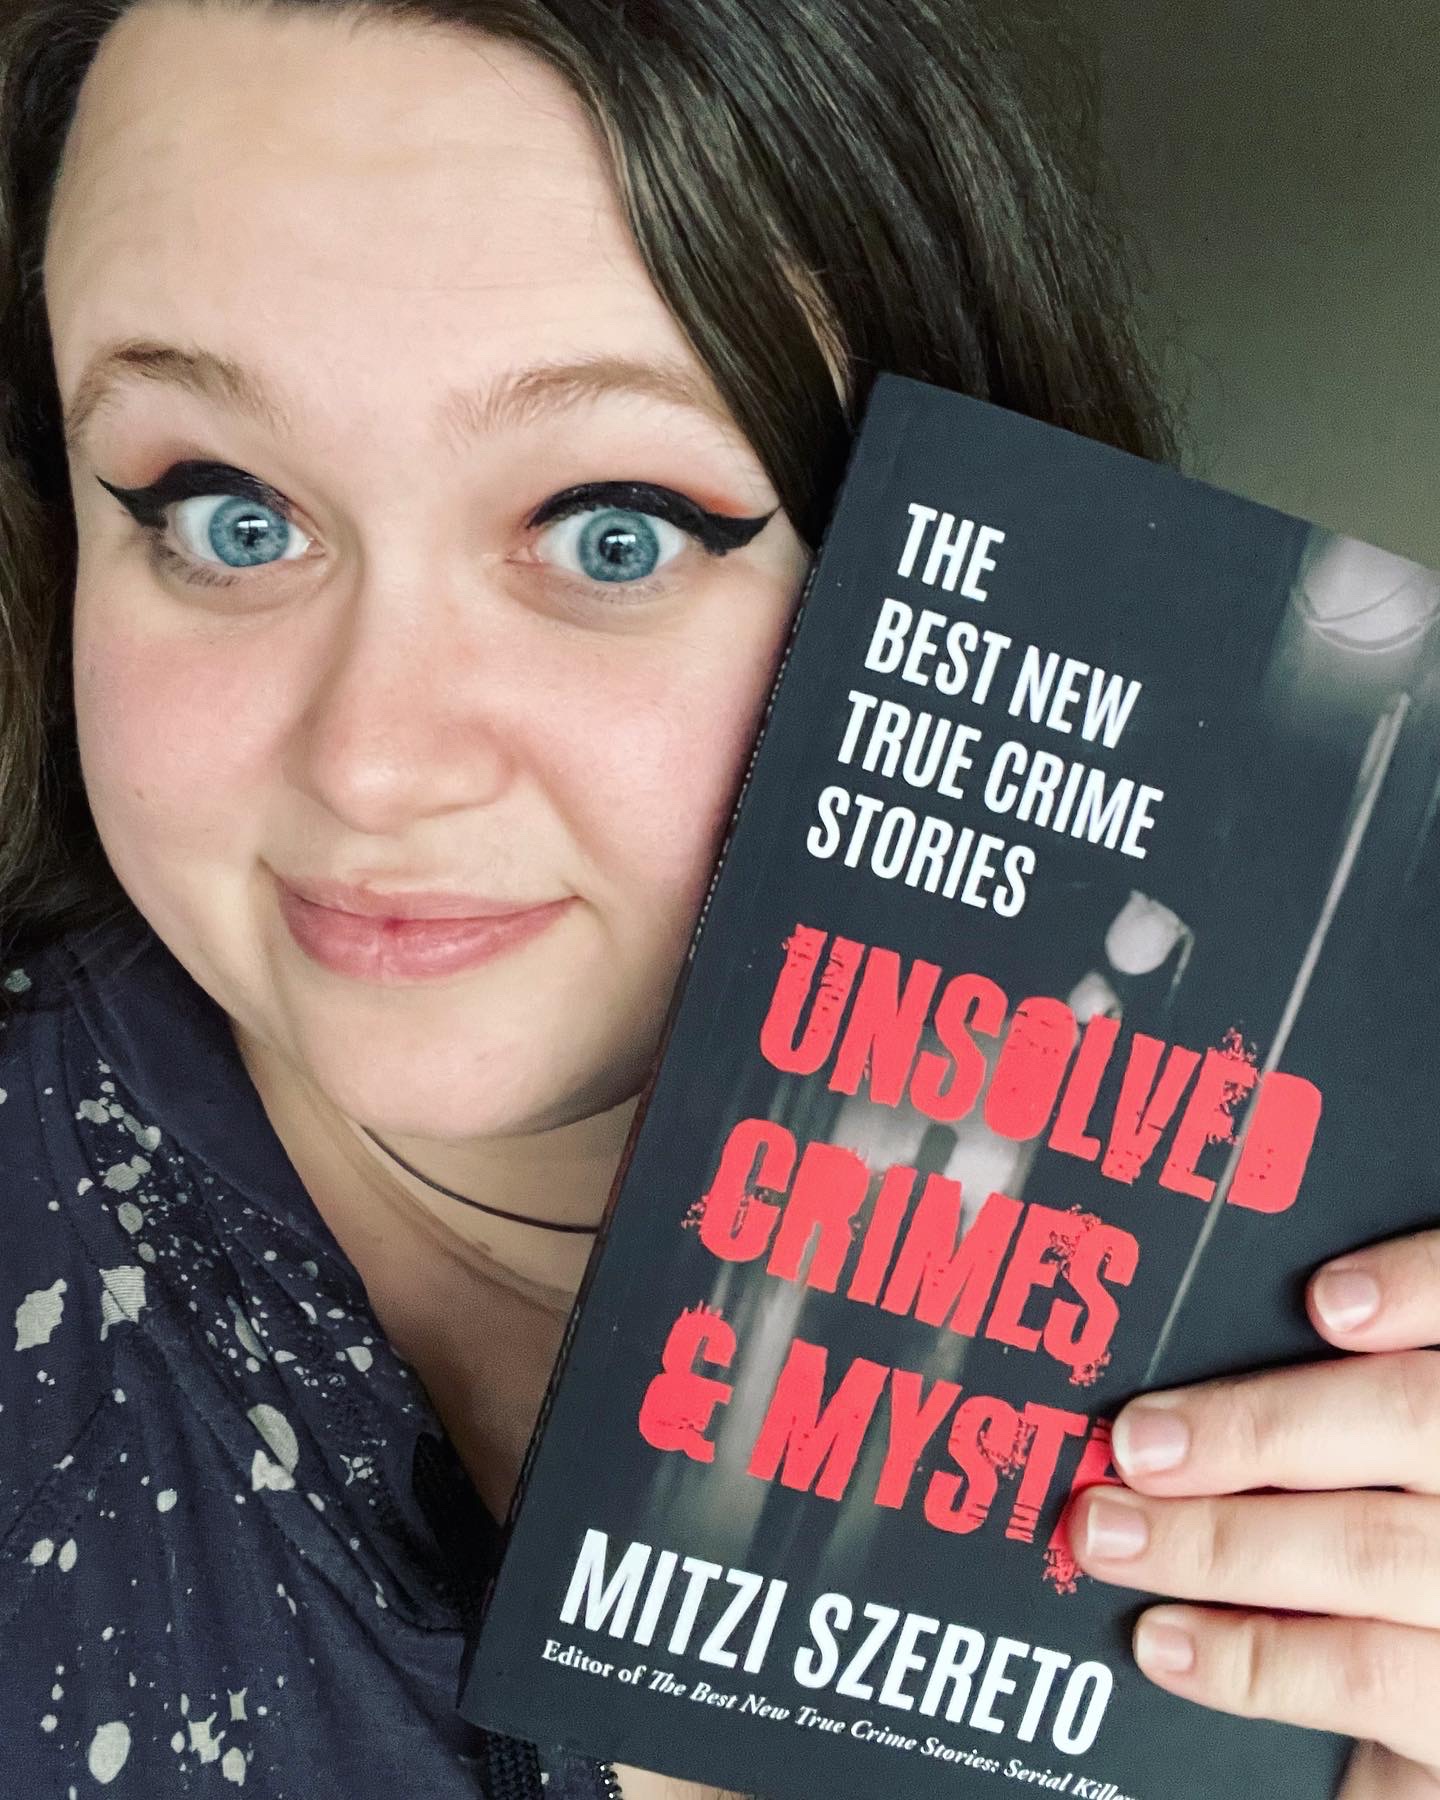 The Best New True Crime Stories Unsolved Crimes And Mysteries Mugshots And Videos Mitzi Szereto